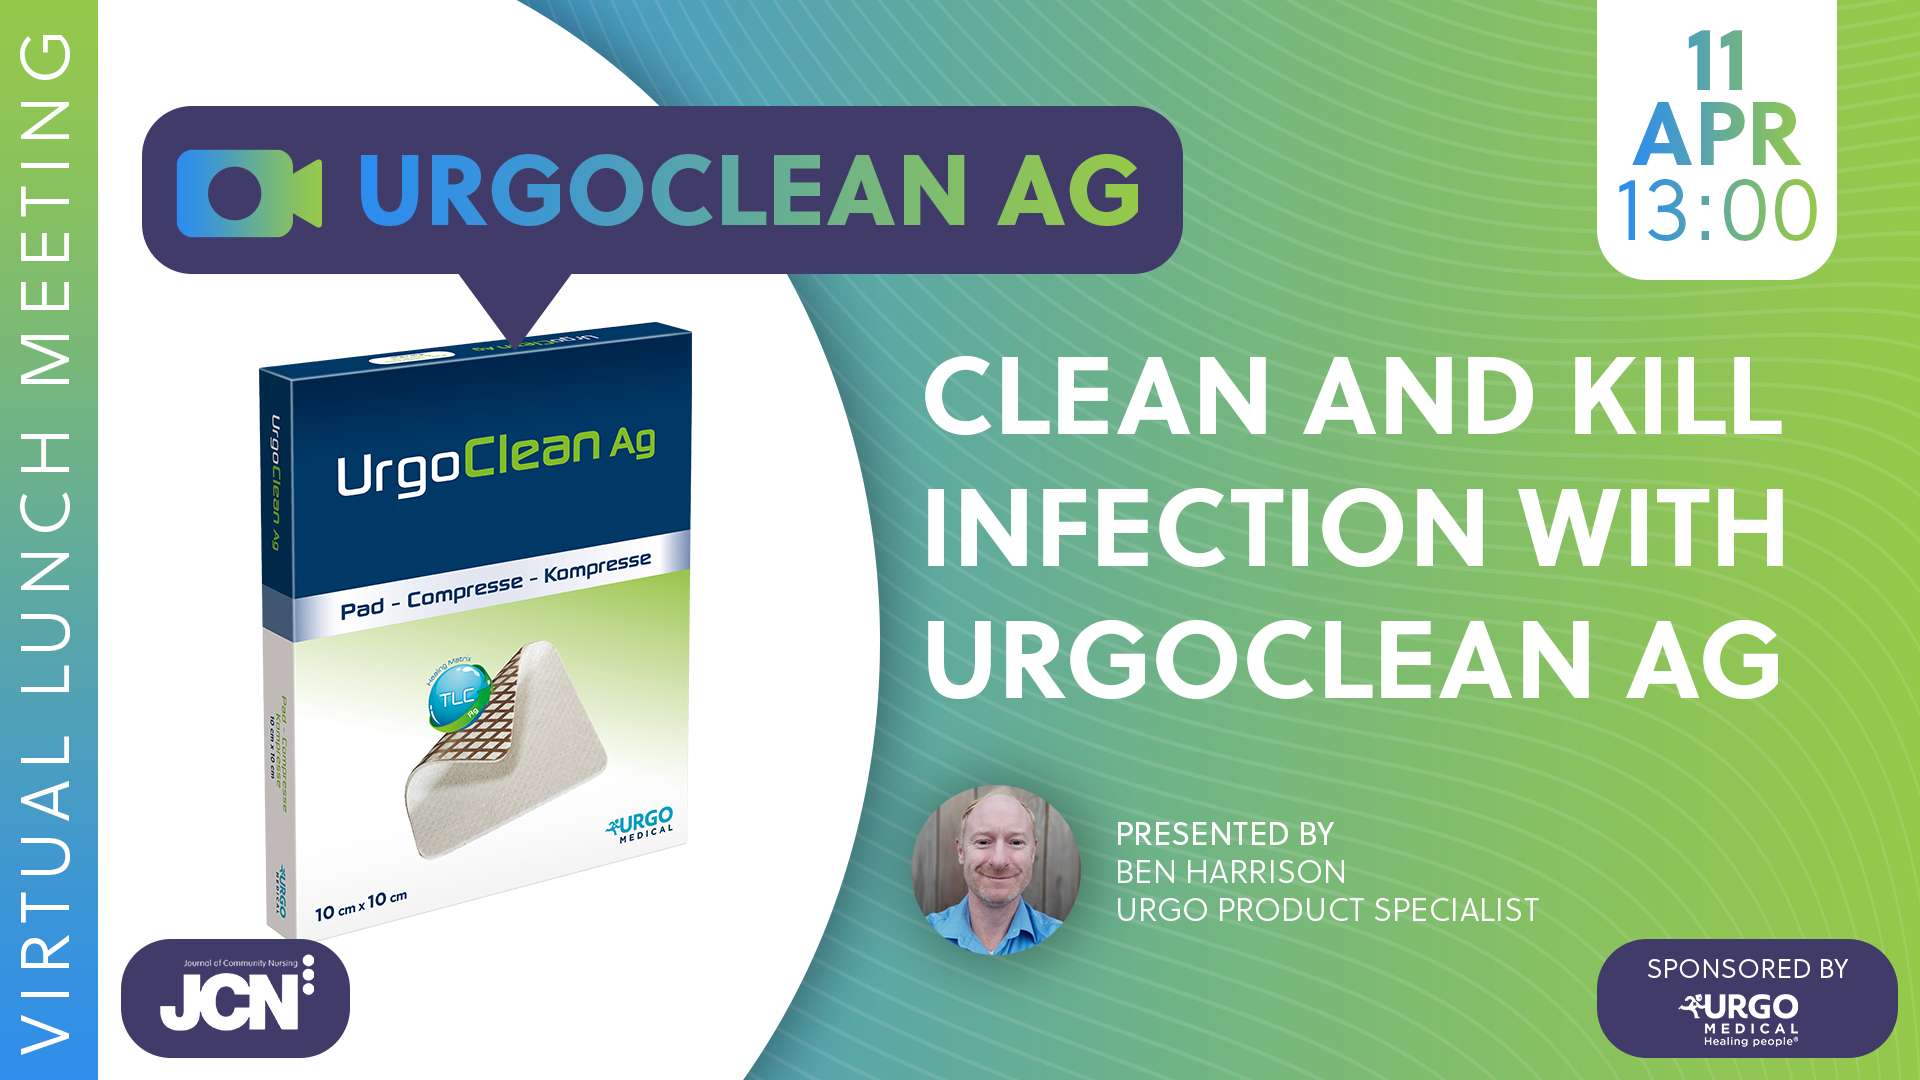 Virtual Lunch Meeting: Clean and kill infection with UrgoClean Ag